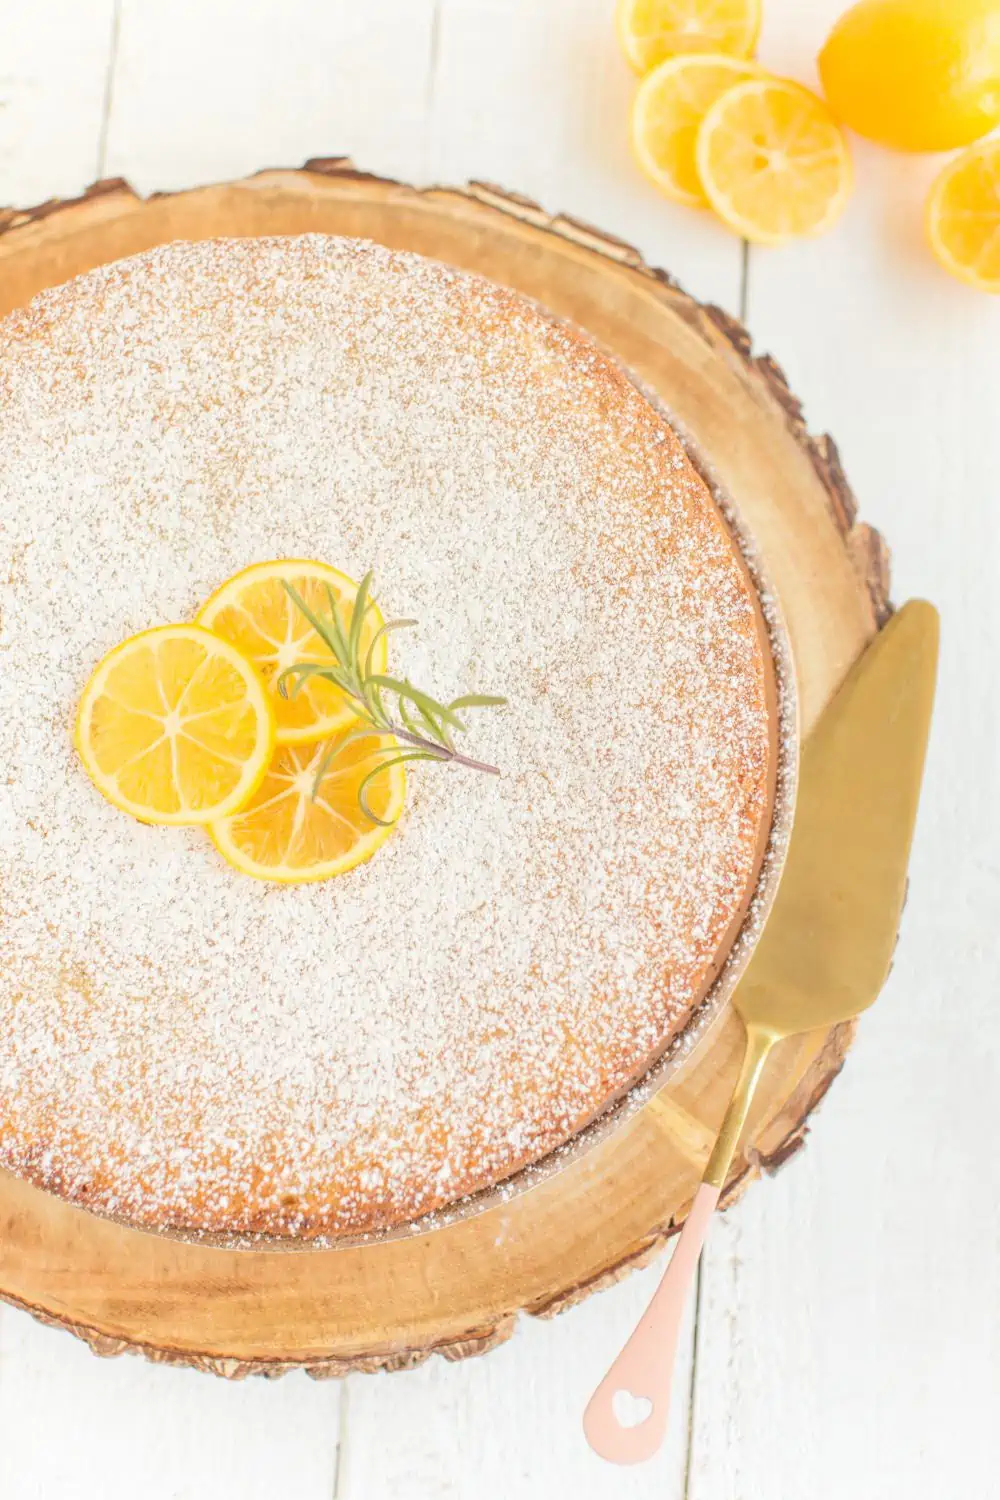 Vegan Lemon Olive Oil Cake topped with sliced lemons and rosemary and served on a rustic wooden cake stand